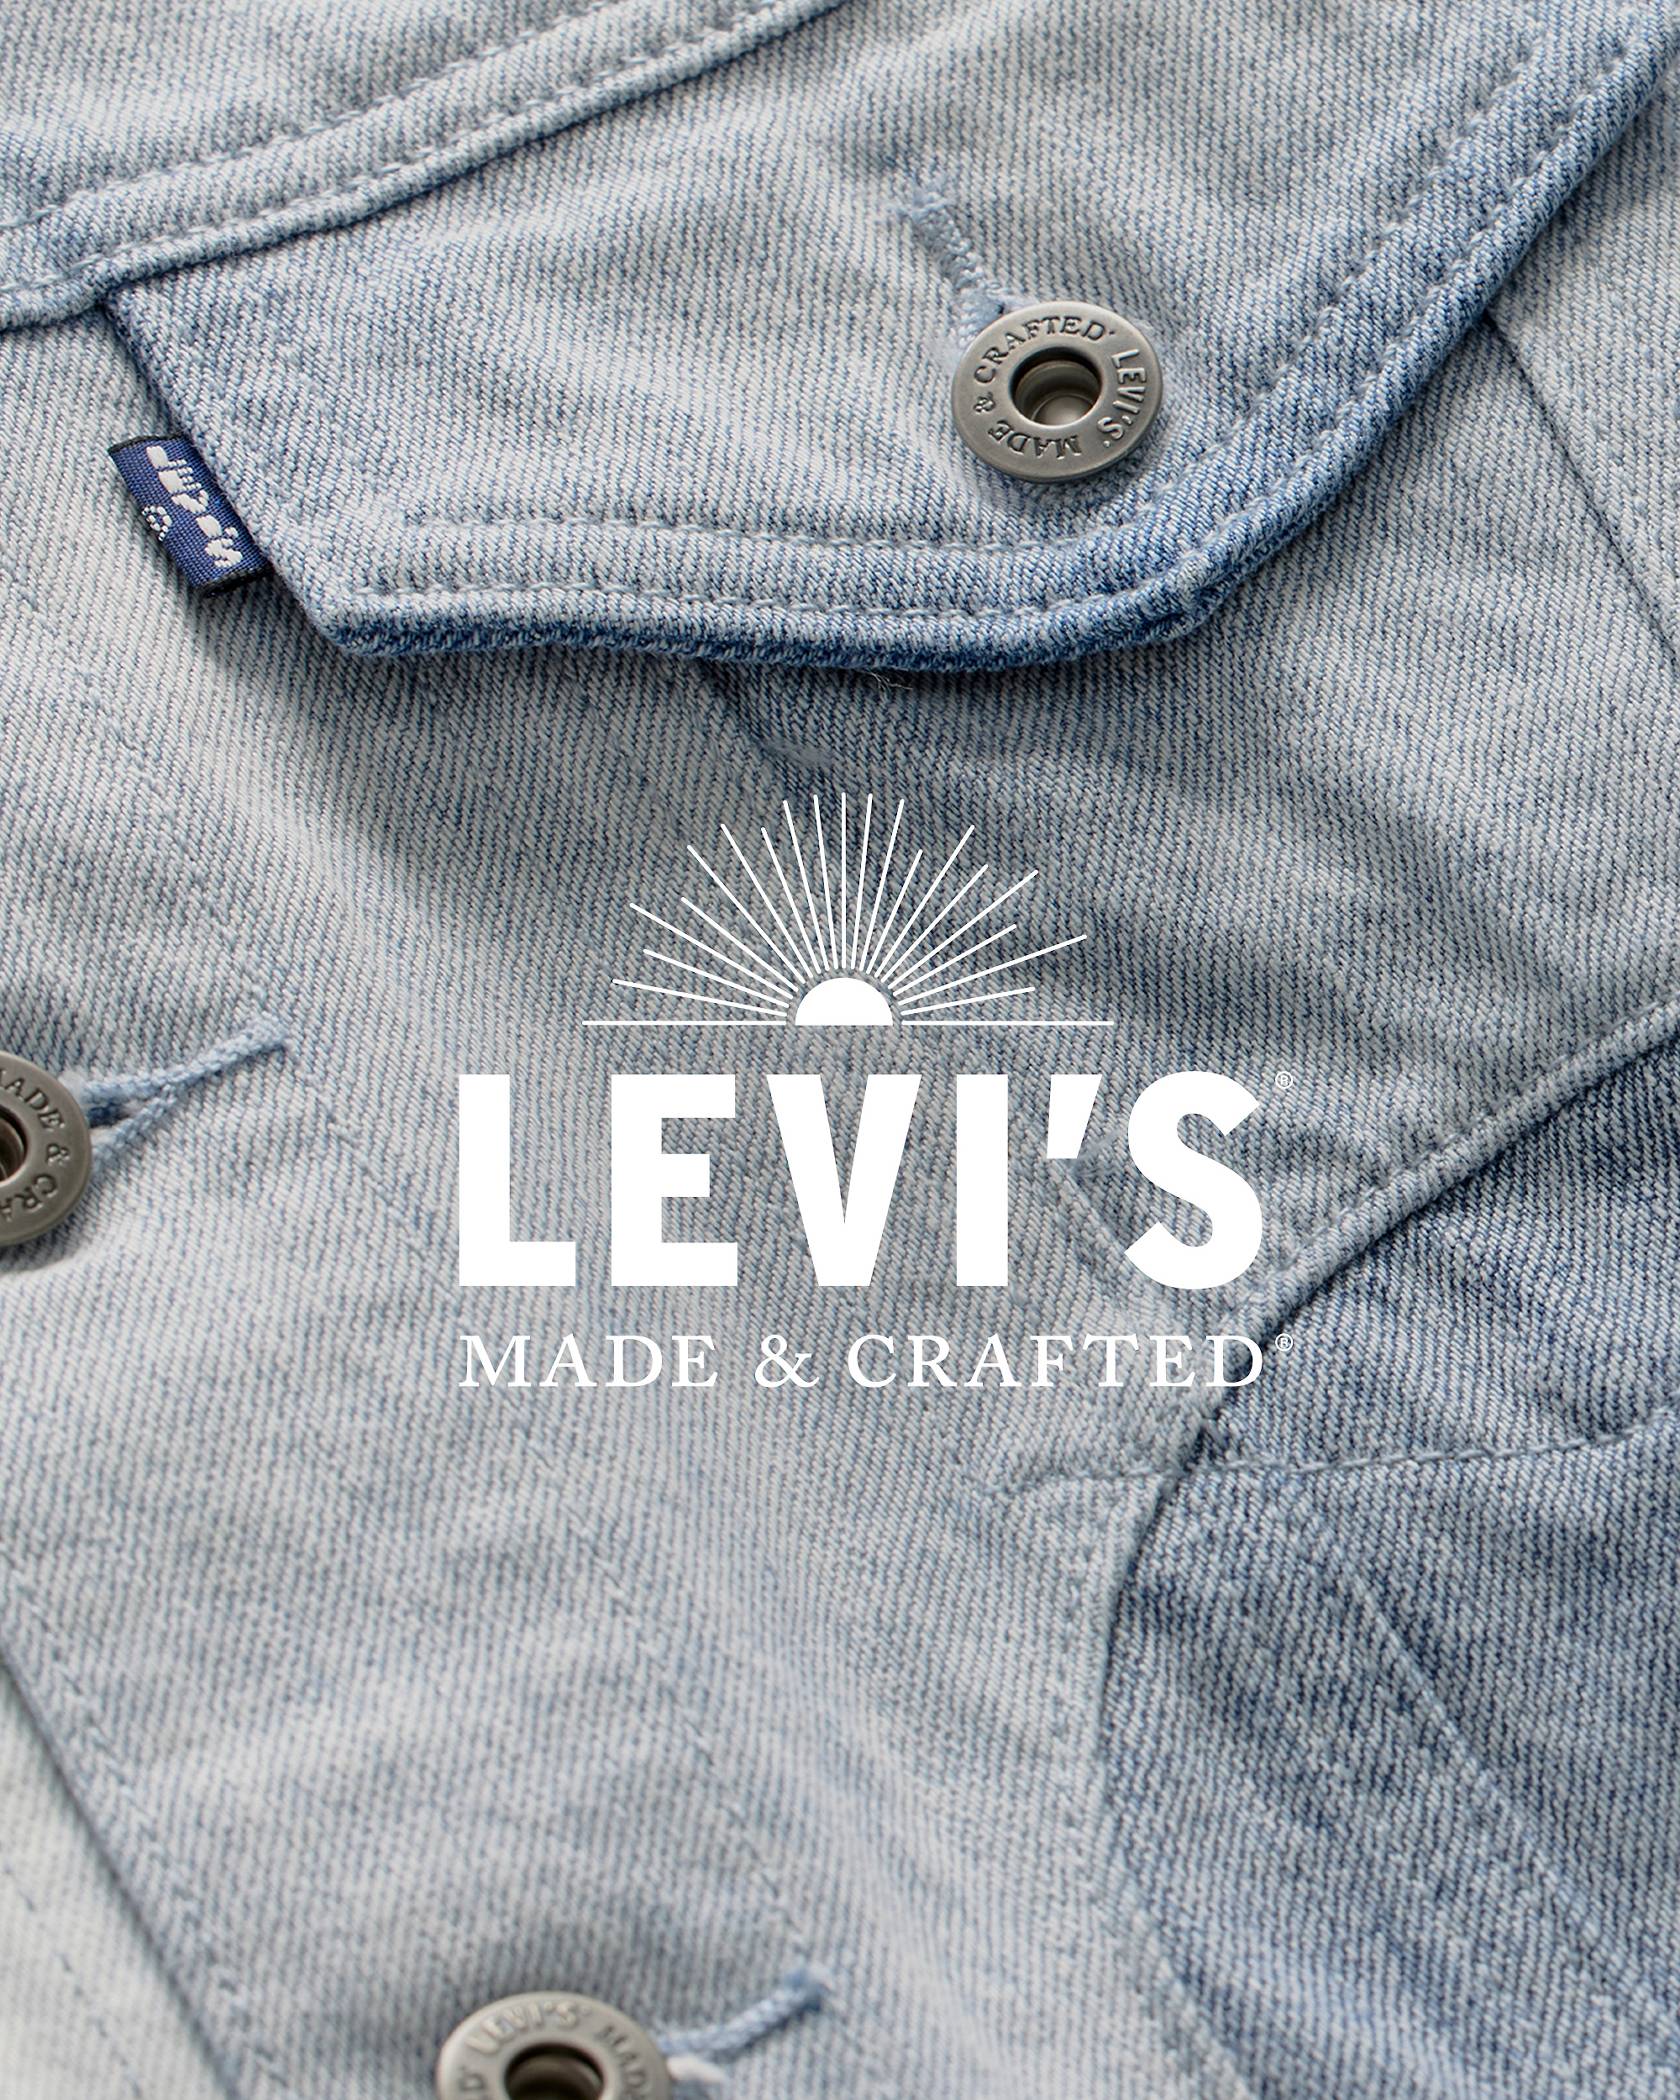 Image of Levi's Made and Crafted Trucker Jacket.